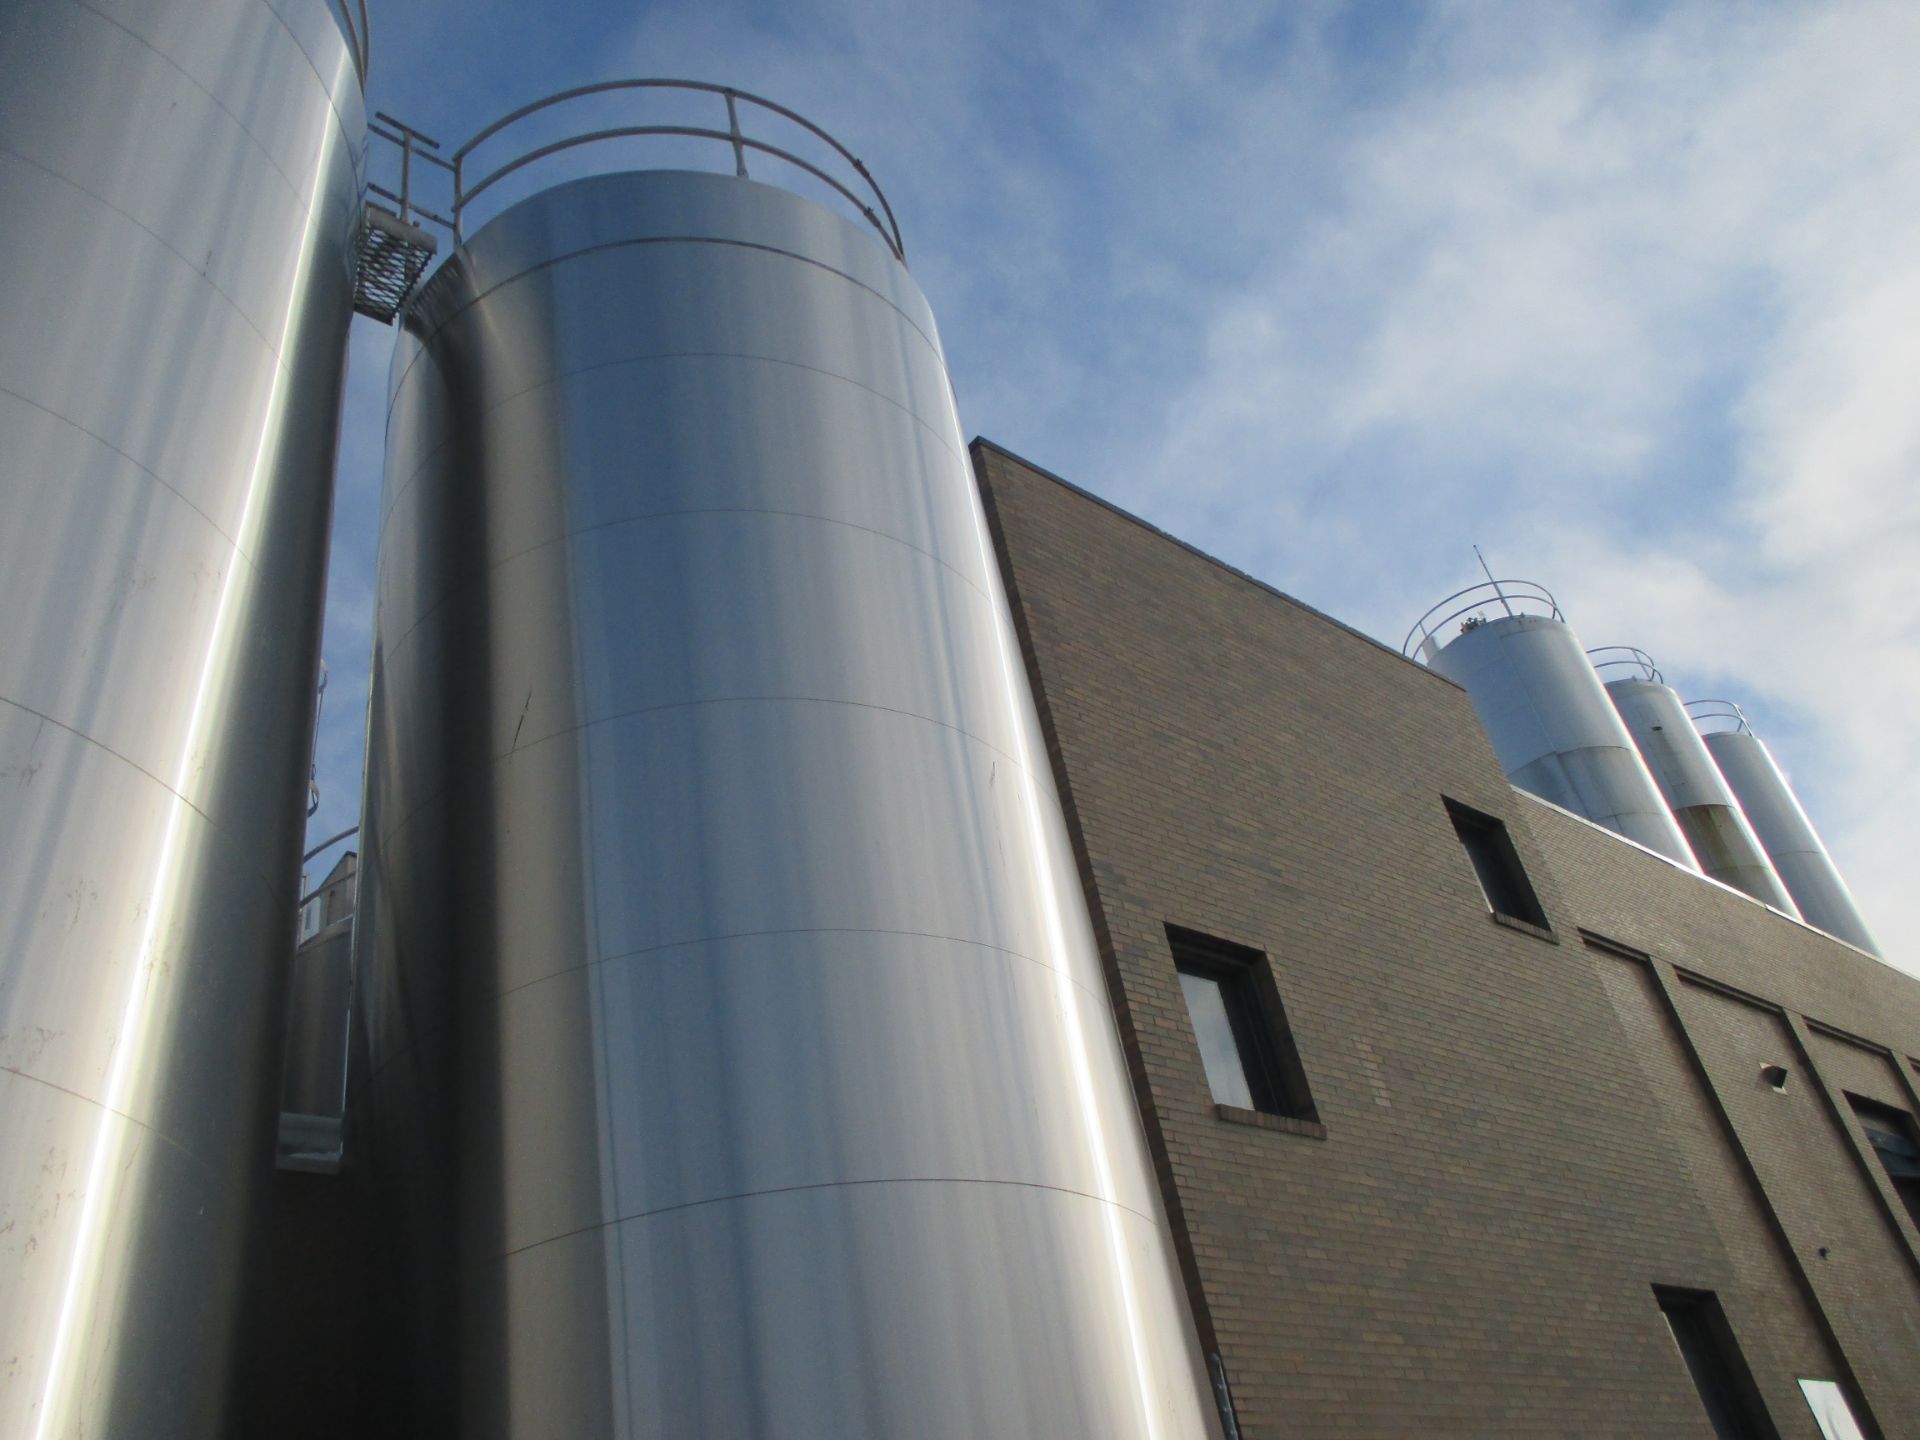 Walker 20,000 Gal. Insulated Silo, M/N VSHT/304 S.S., S/N SPG-23005, with S/S Exterior, Vertical Agi - Image 2 of 7